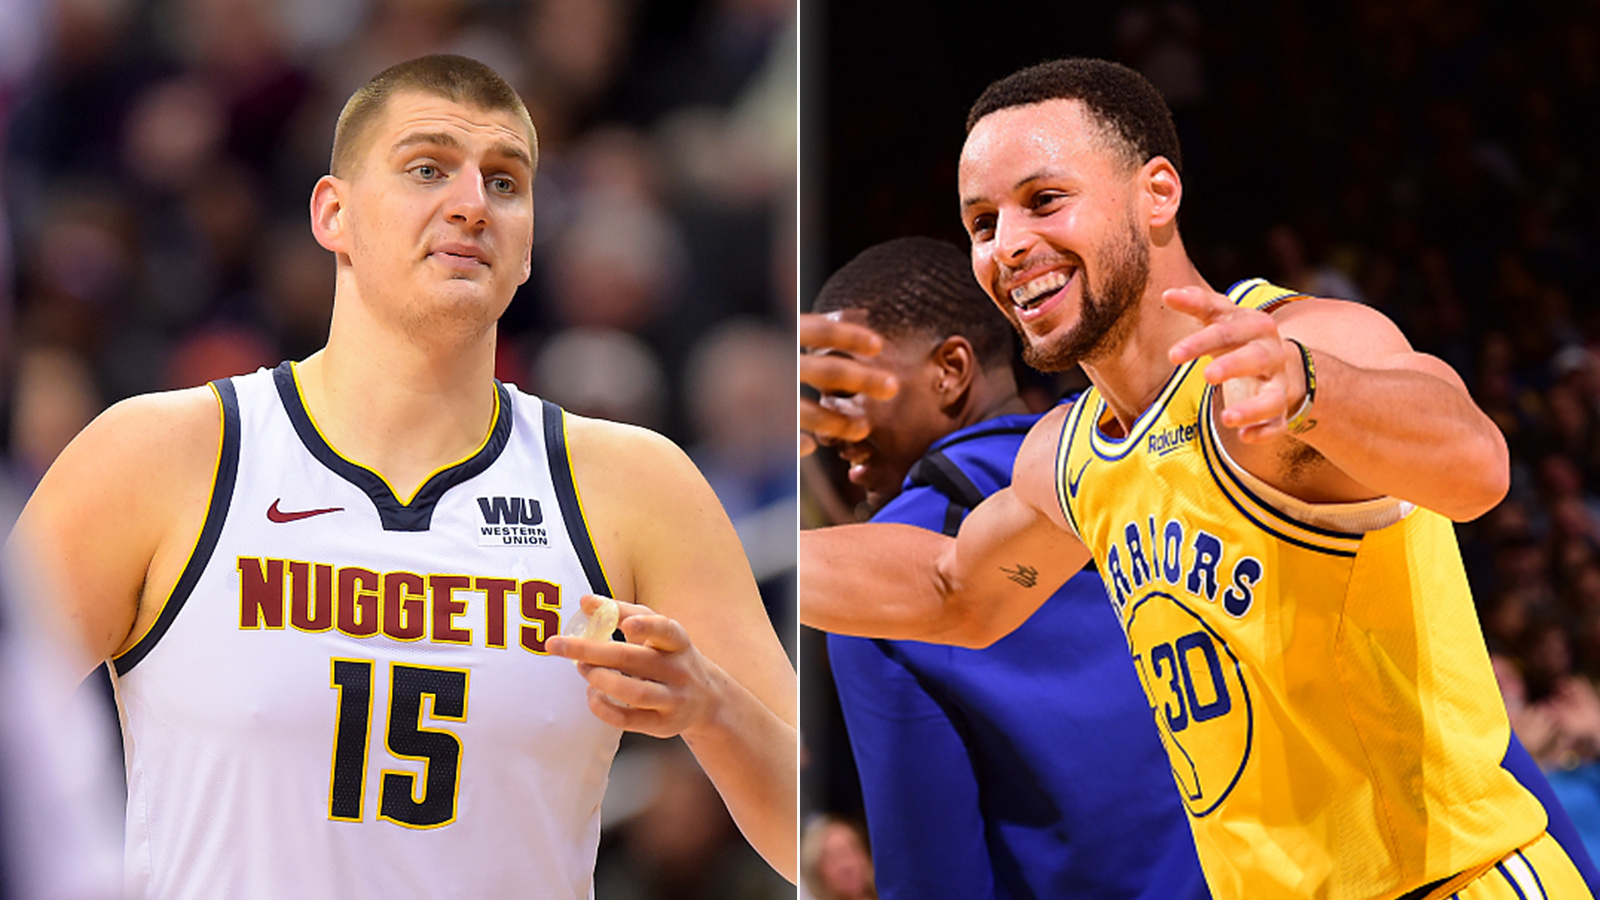 NBA highlights on Mar. 21: Warriors, Nuggets continue to lead the West ...